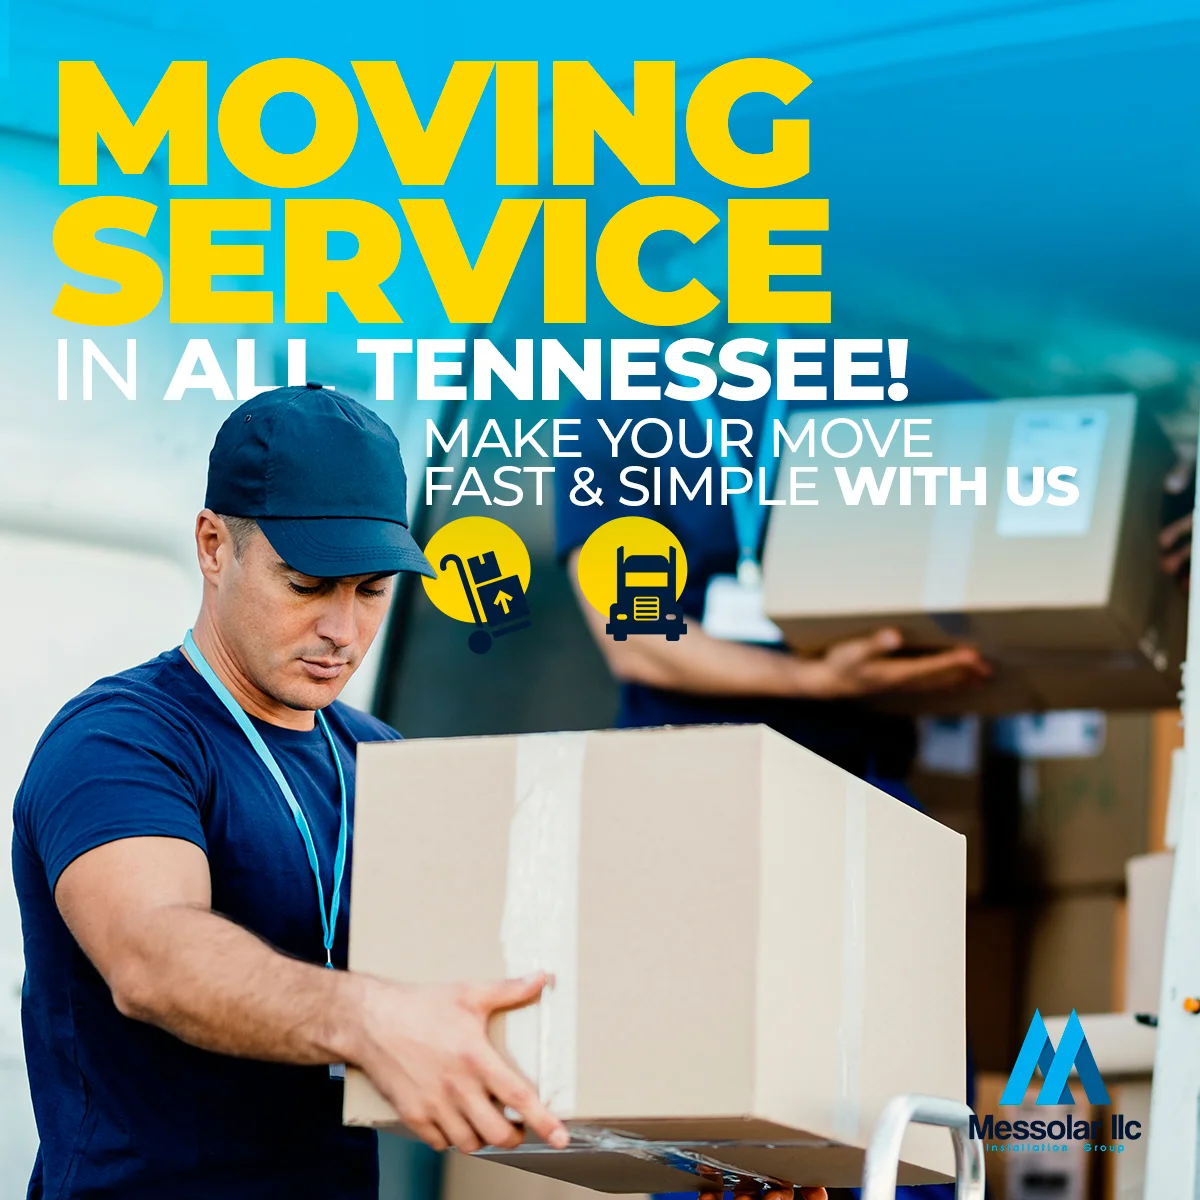 MovingServices